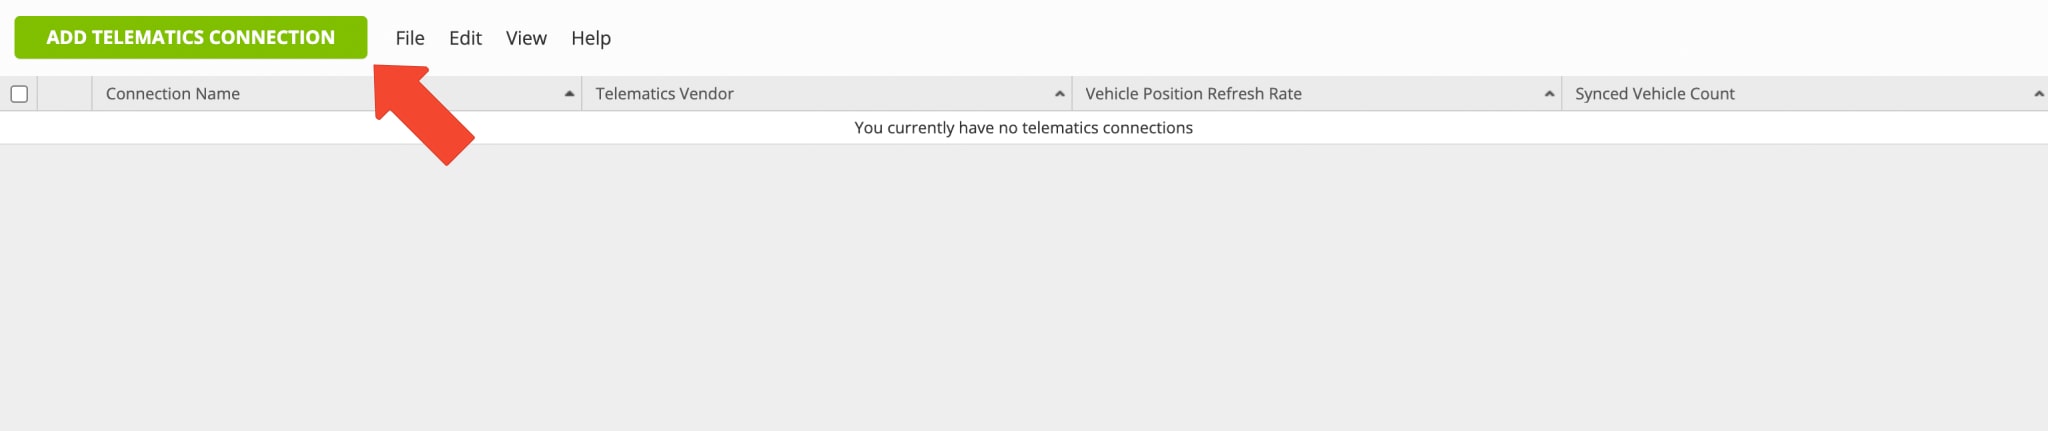 Add telematics connection to import vehicles into Route4Me route optimization and planning software.